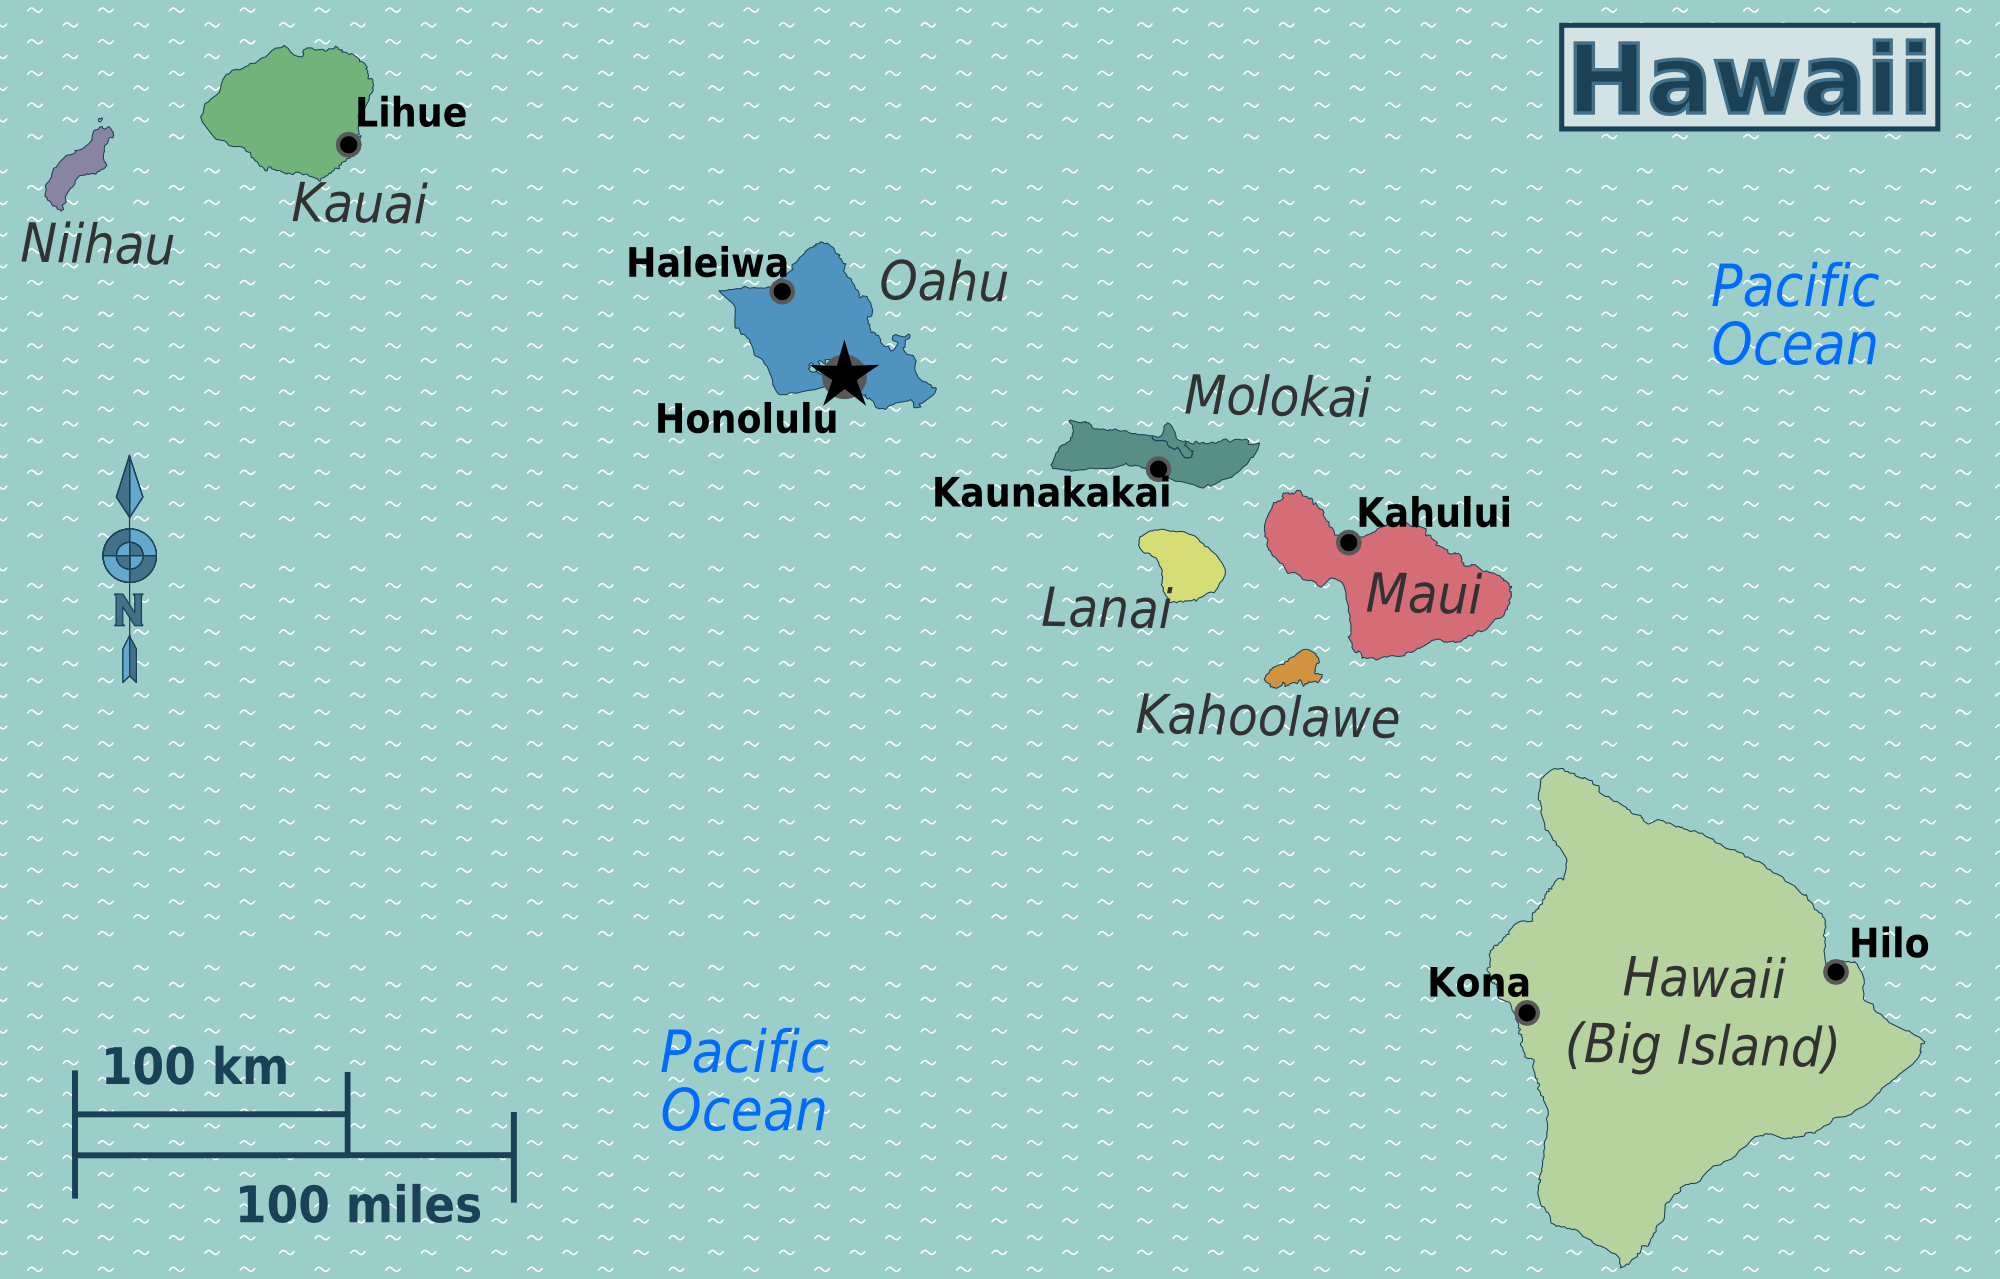 A picture of the Hawaiian Islands or a map of Hawaii.